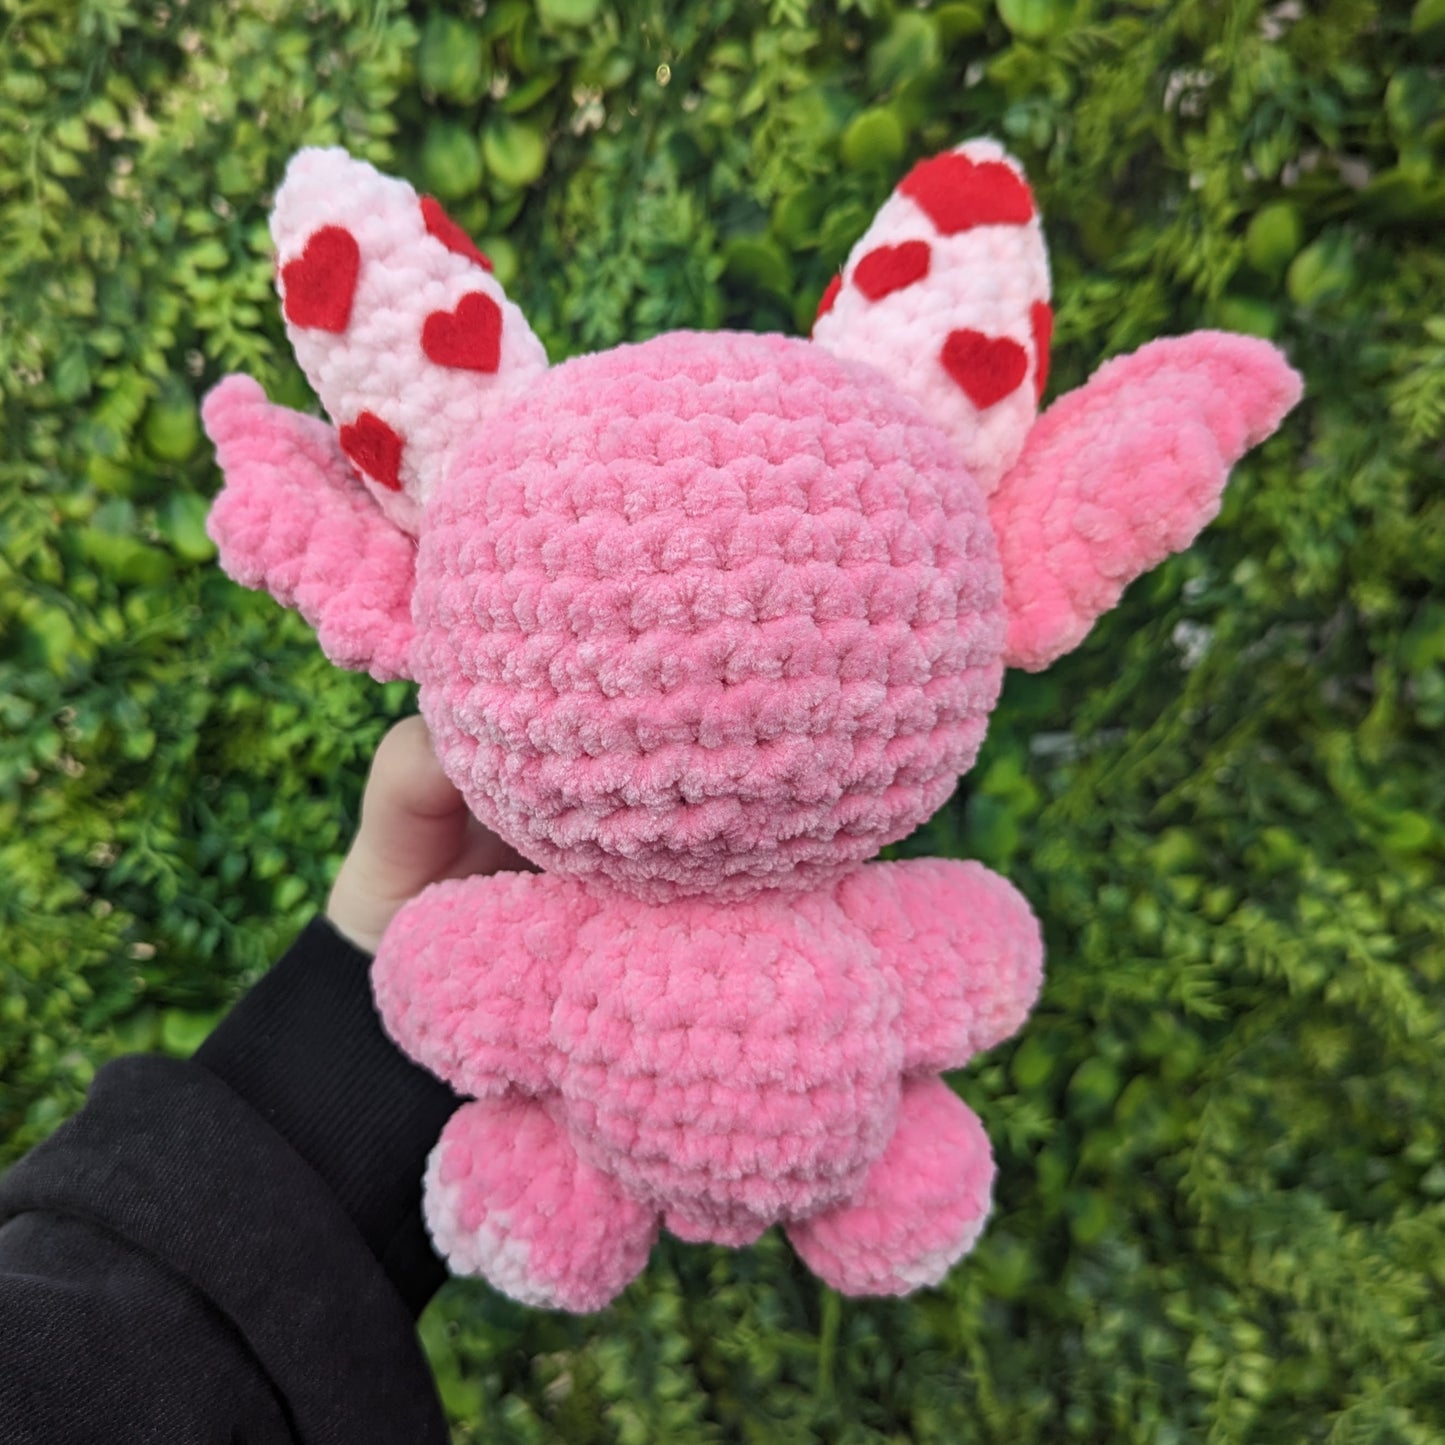 Baby Heart Baphomet Goat Crochet Plushie [Archived]